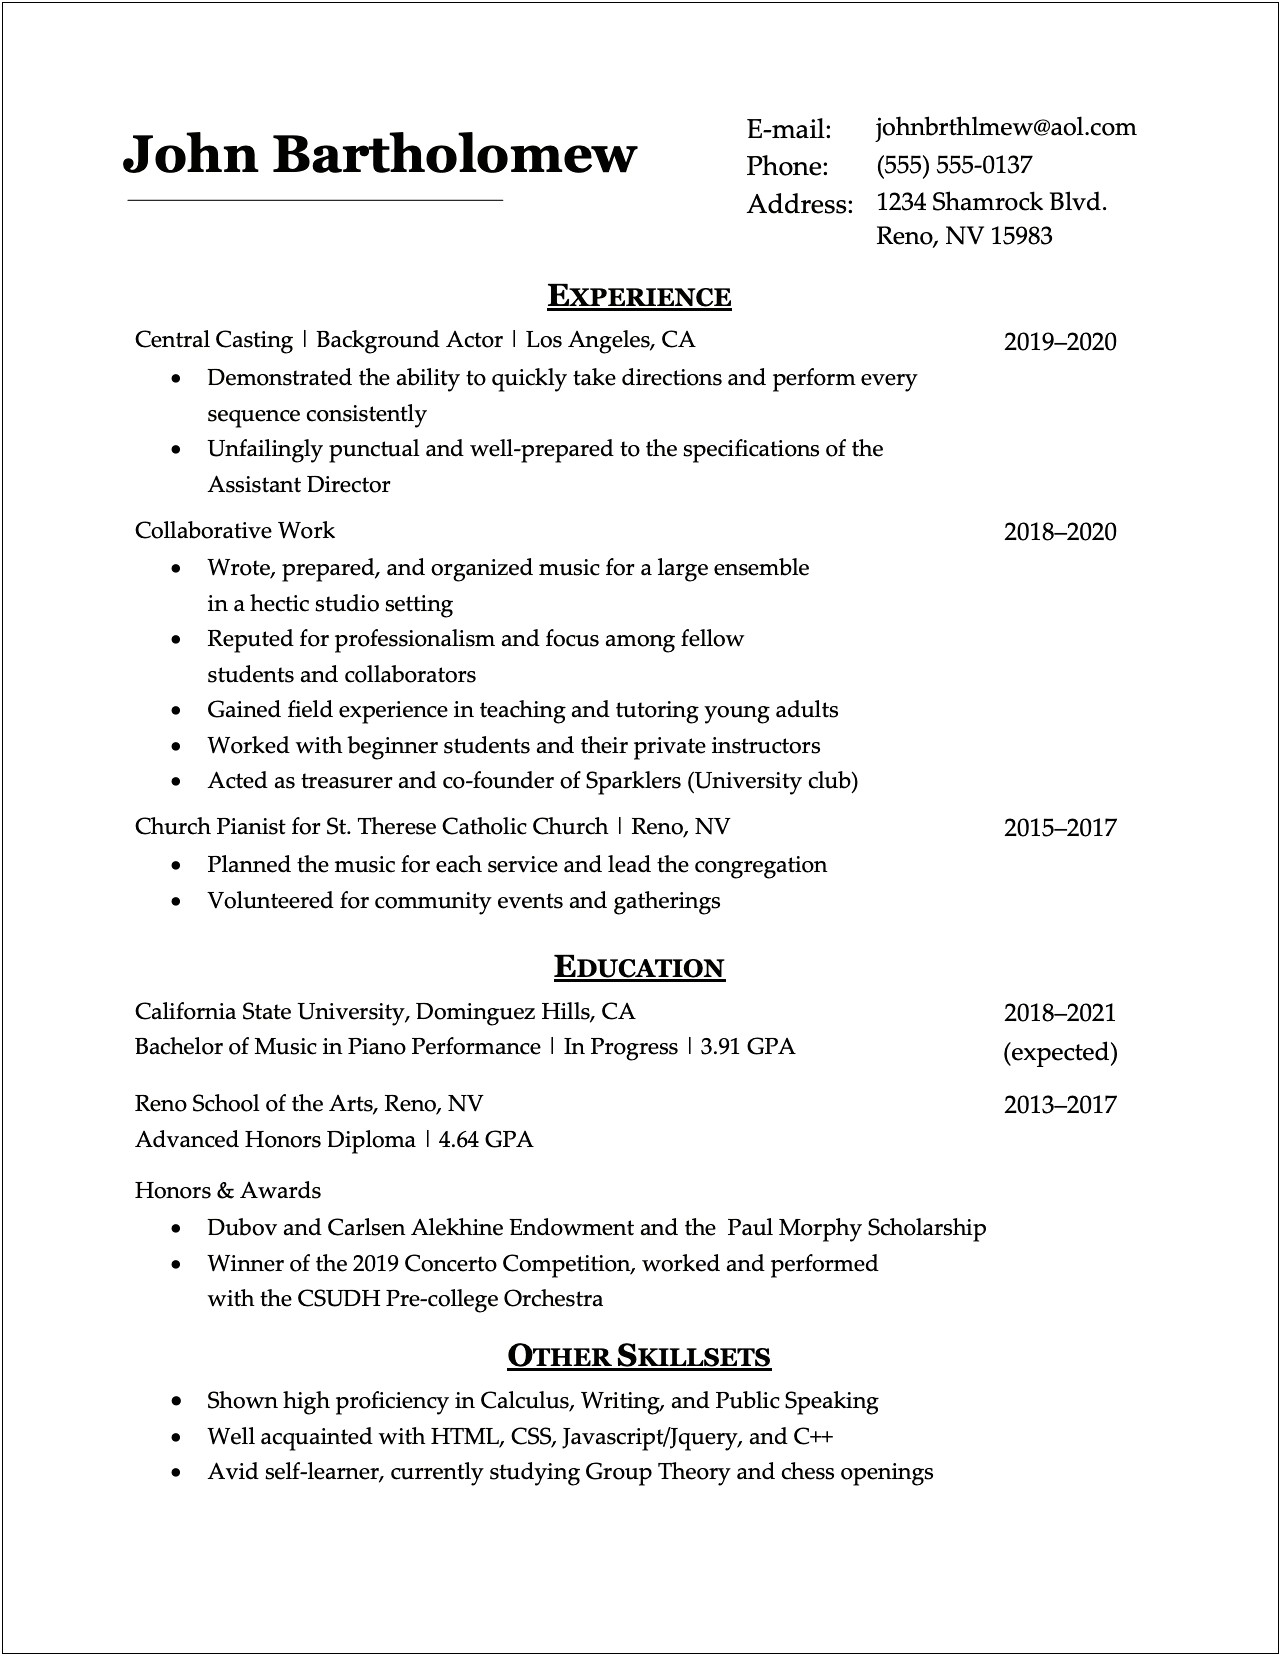 Resume For Forst Time Job Seekers